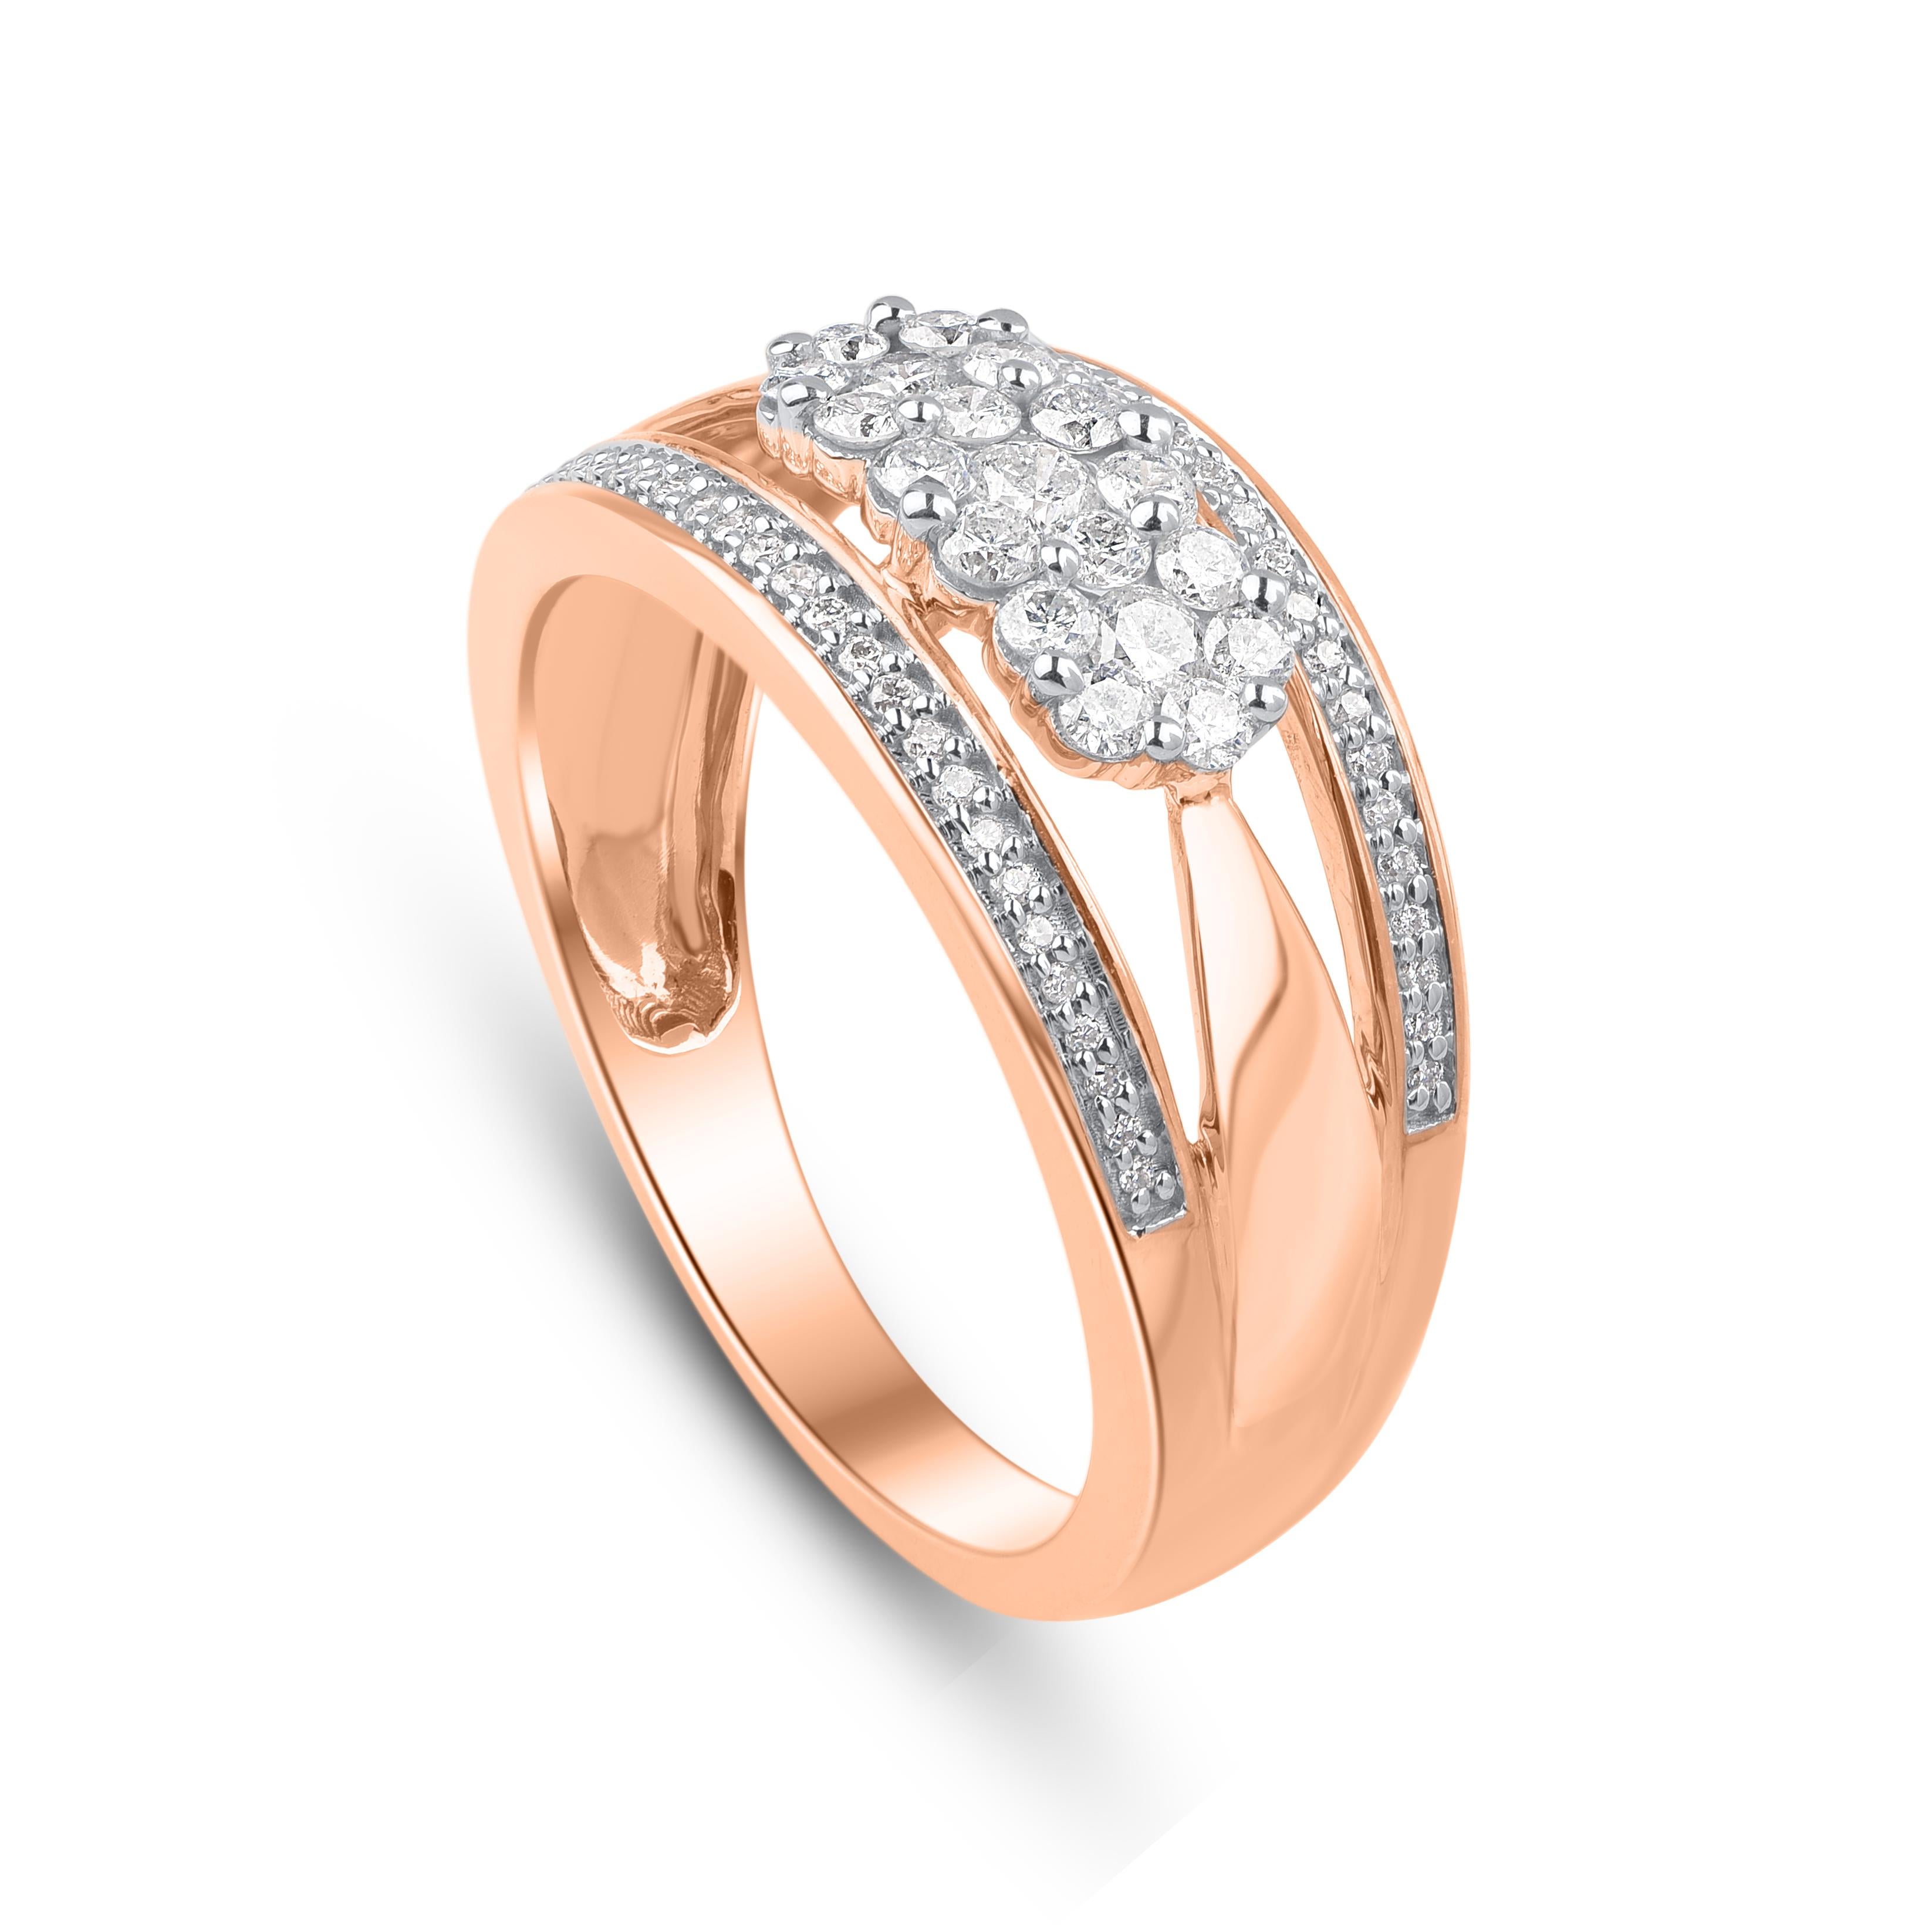 A magnificent studded ring will add extra shine to your attire. Made 10 kt rose gold and studded with 69 round-cut diamonds in pressure and pave setting, diamonds are graded H-I Color, I2-I3 Clarity. Ring size is US size 7 and can be resized on